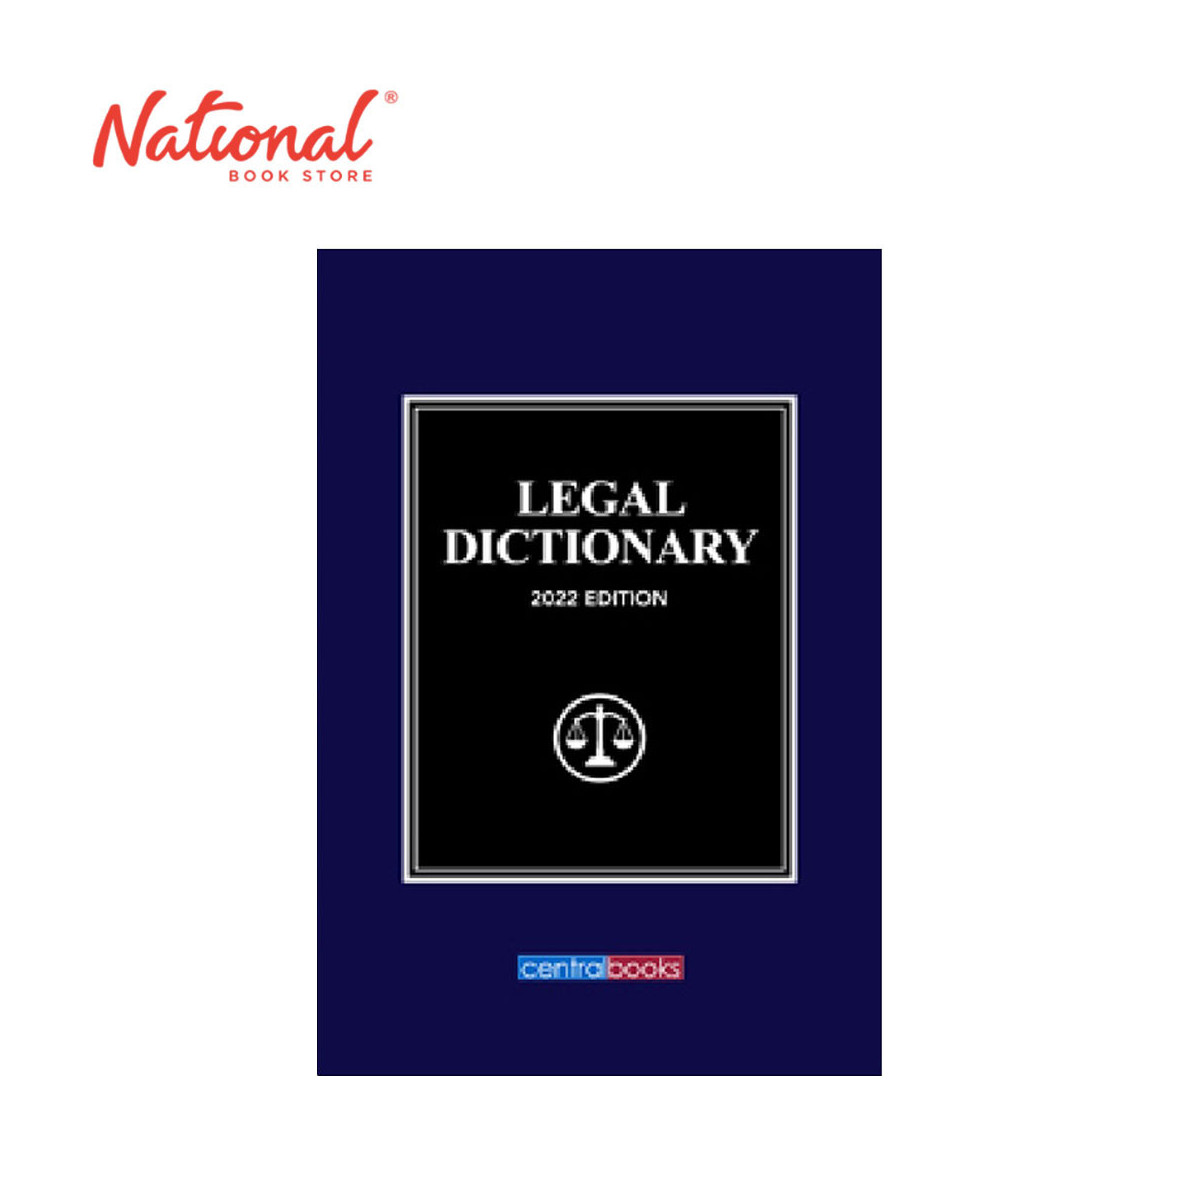 Legal Dictionary 2022 (Pocket Size) by CBSI Editorial Staff - Hardcover - College Books